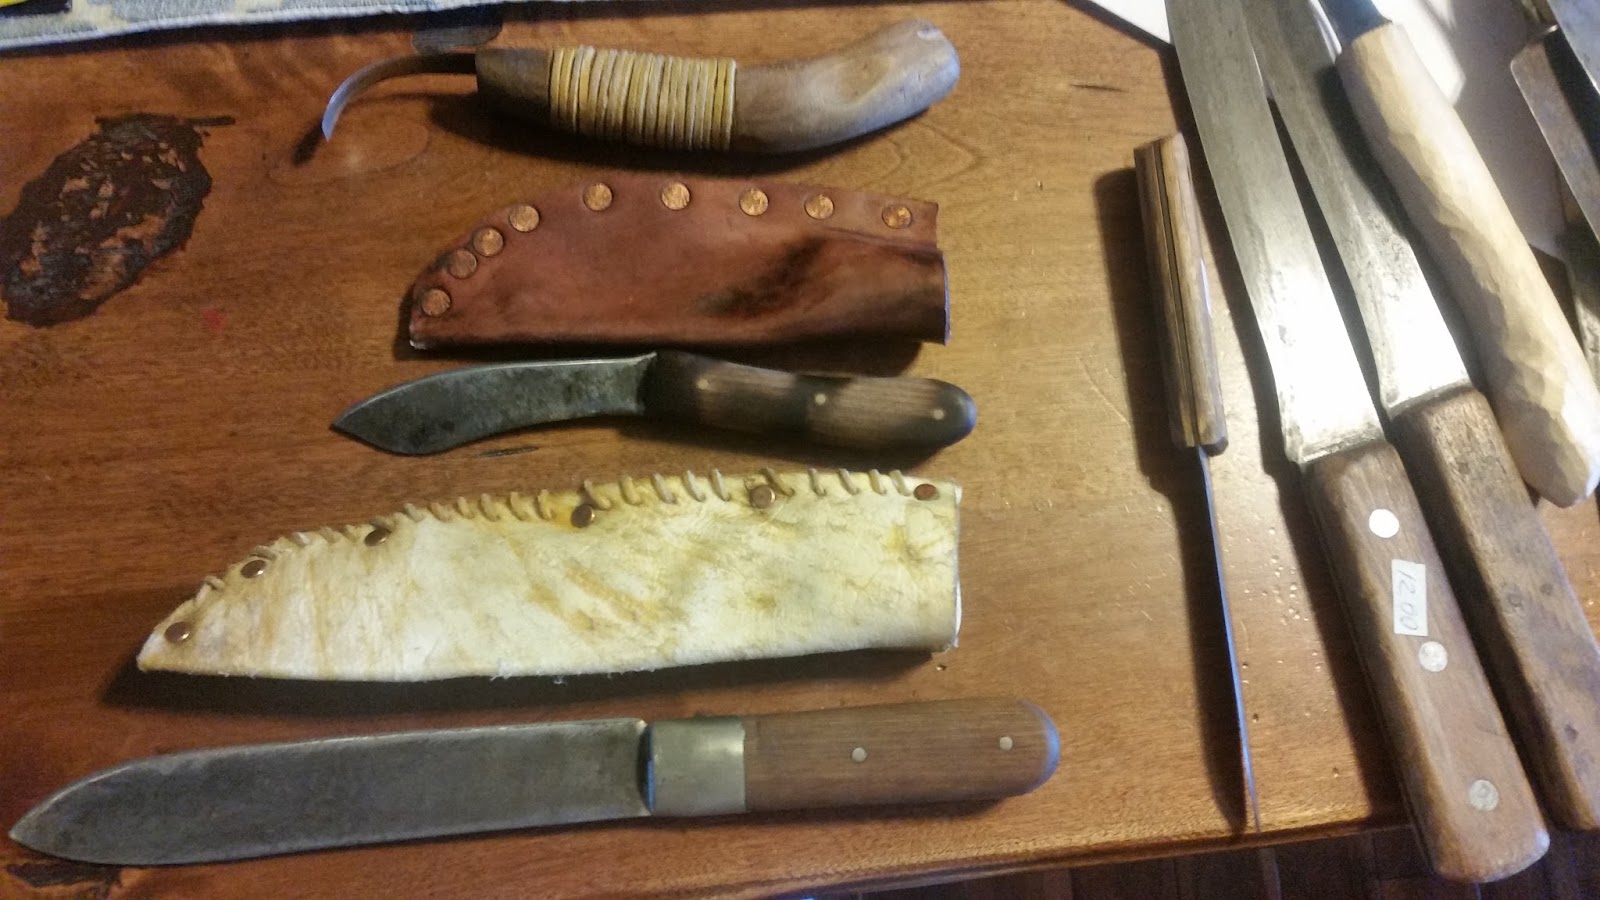 Woods Roamer: PHOTO GALLERY of HISTORICAL BUTCHER, SLICING AND BONING KNIVES